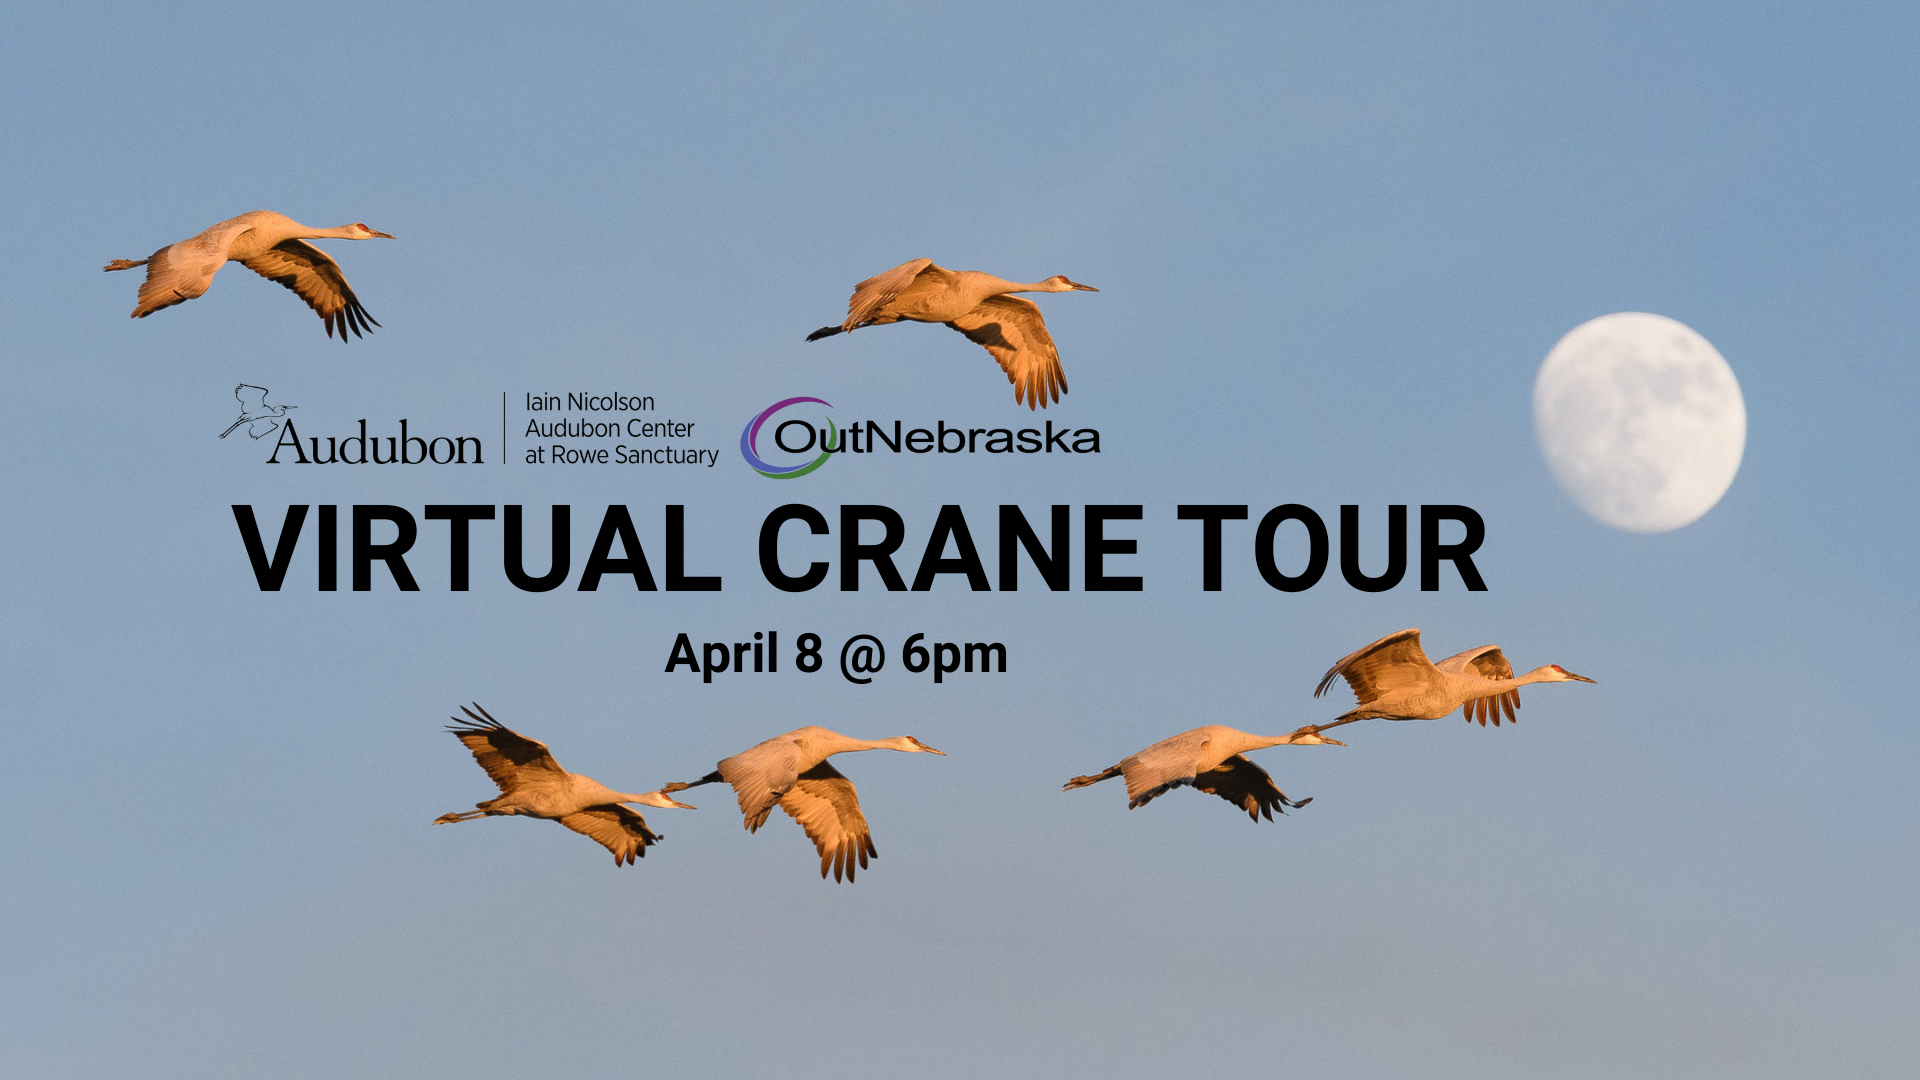 Image of 6 flying sandhill cranes. The sky is blue and dusty with a full moon. Text: Virtual Crane Tour April 8 at 6pm.